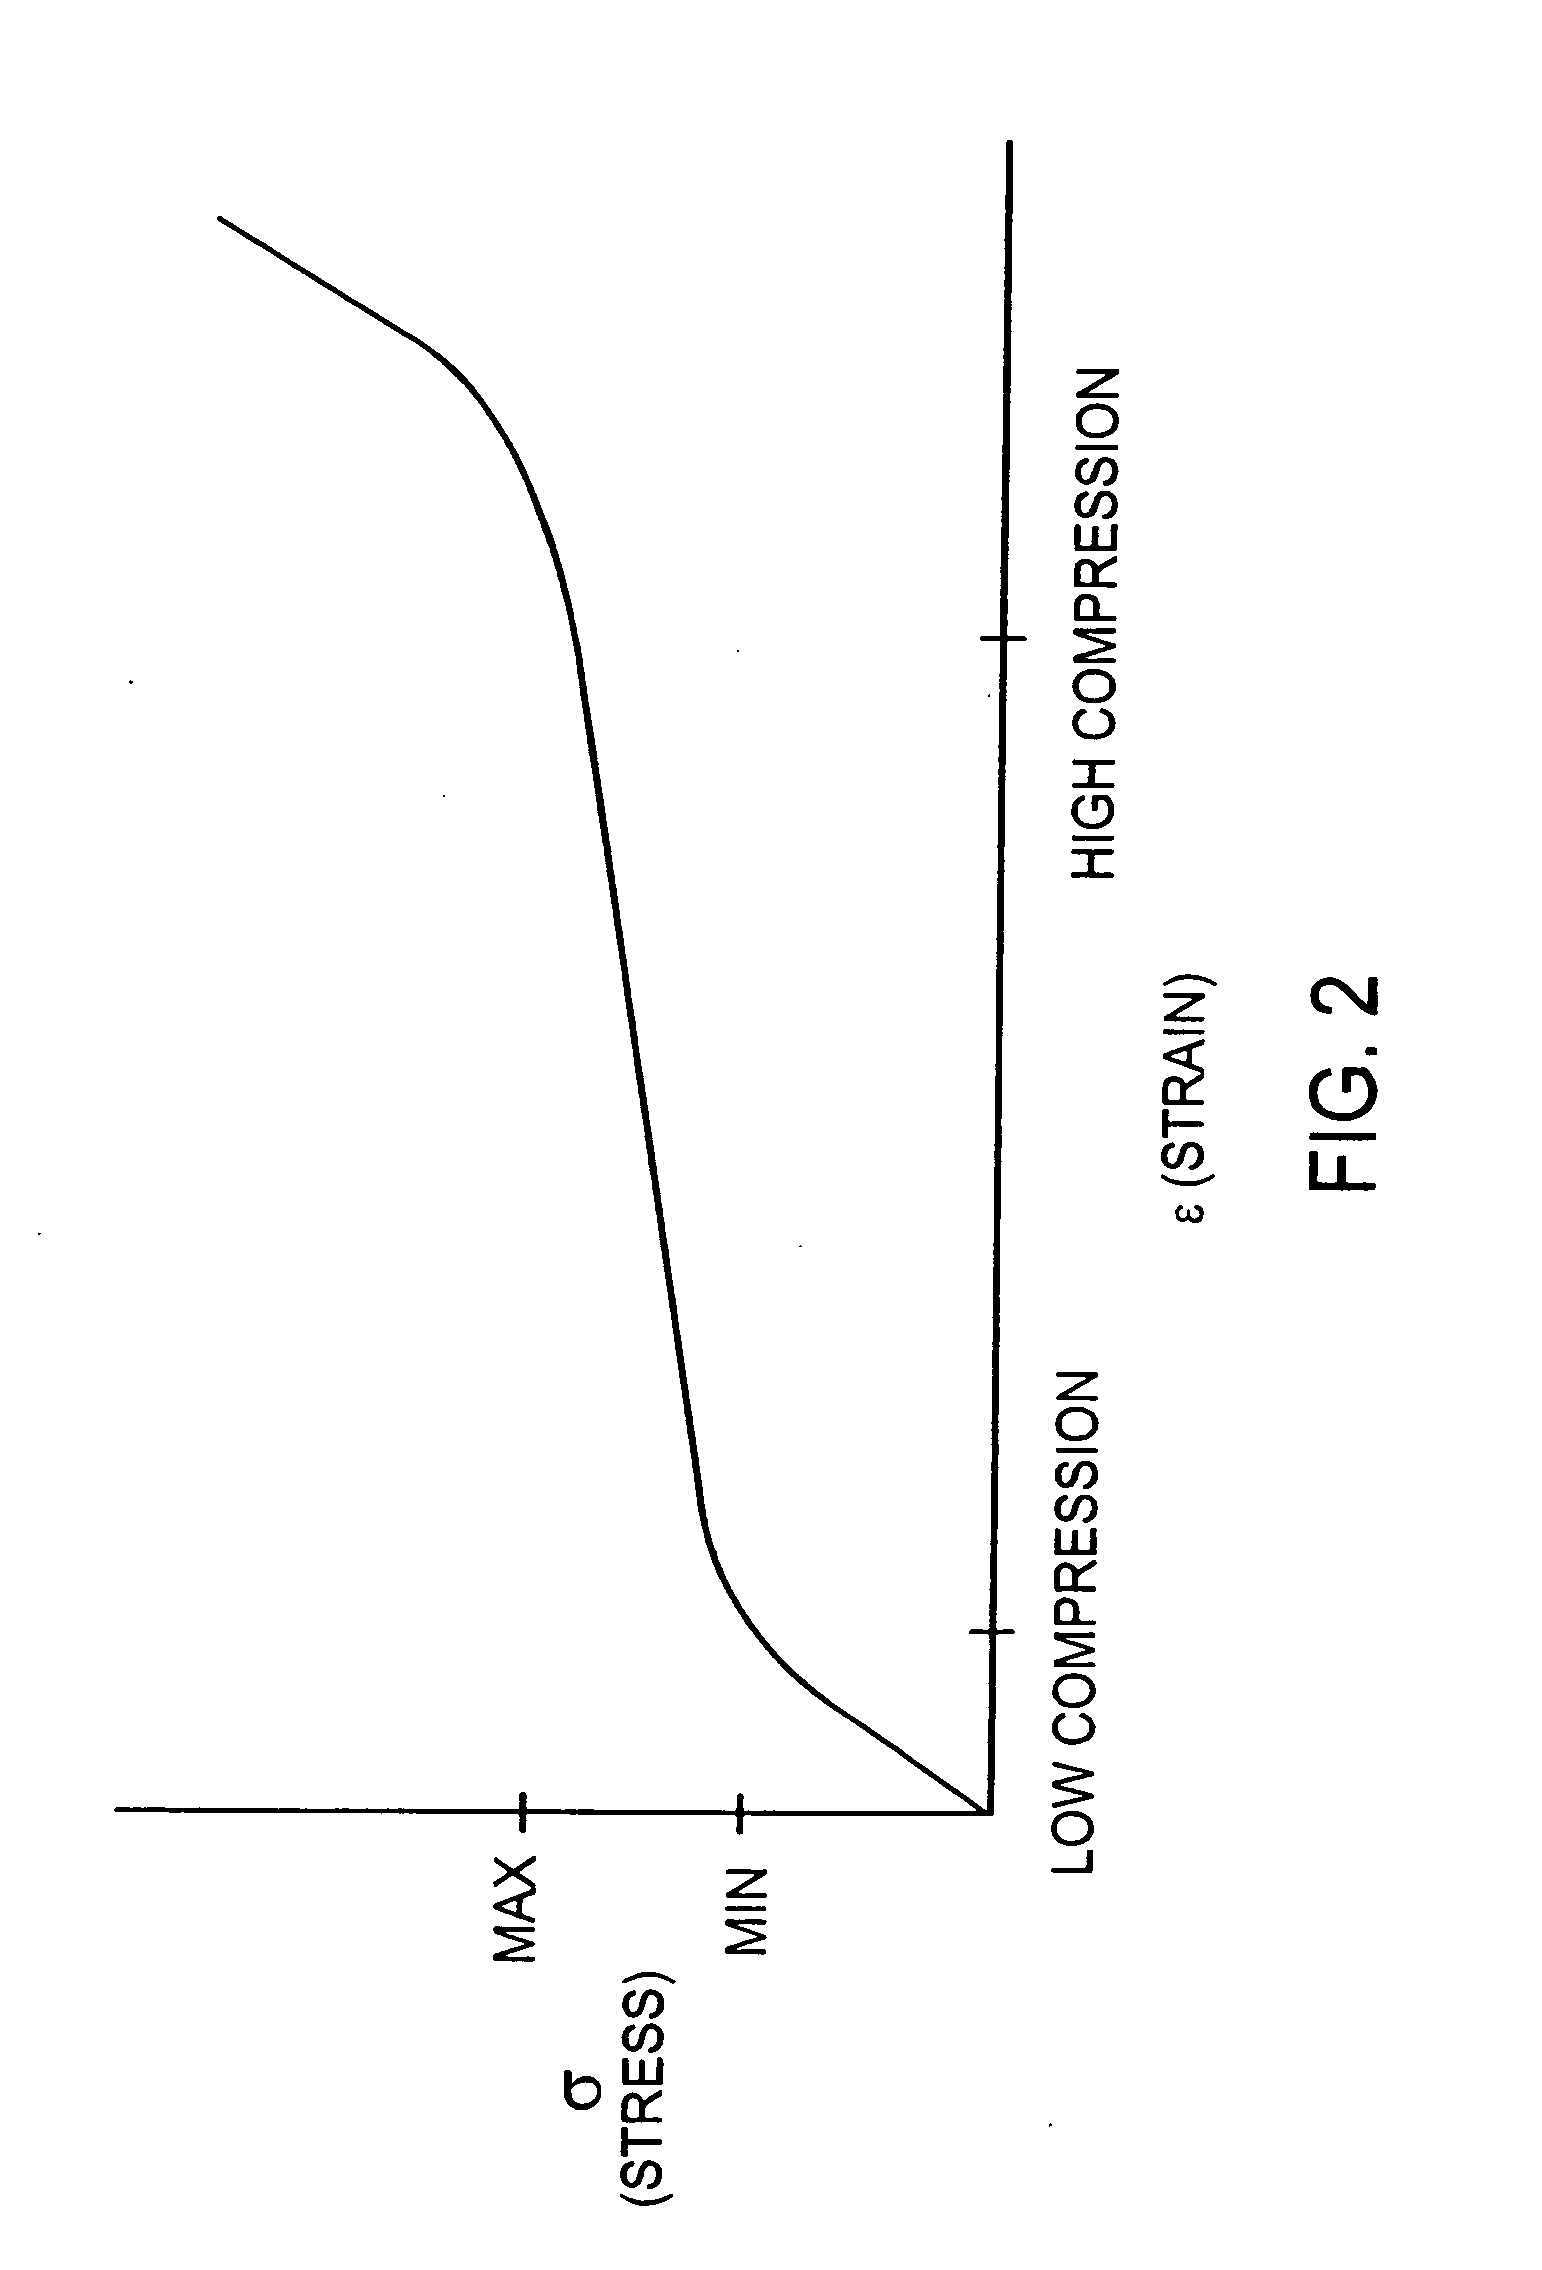 Chamber with adjustable volume for cell culture and organ assist